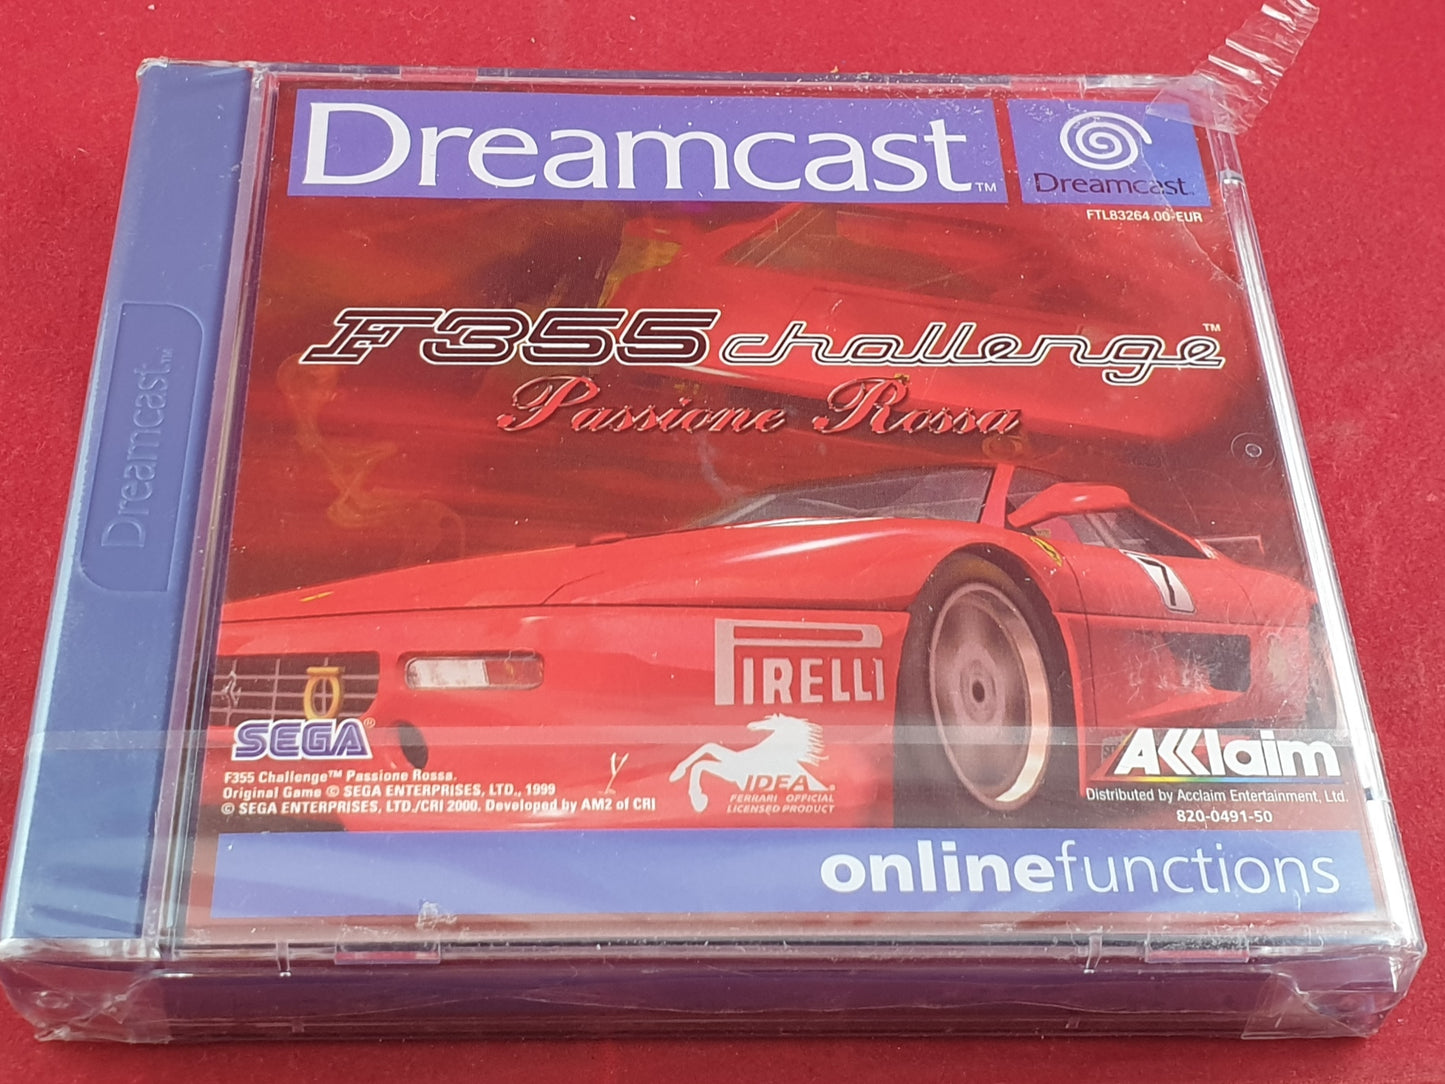 Brand New and Sealed F355 Challenge Passione Rossa Sega Dreamcast Game